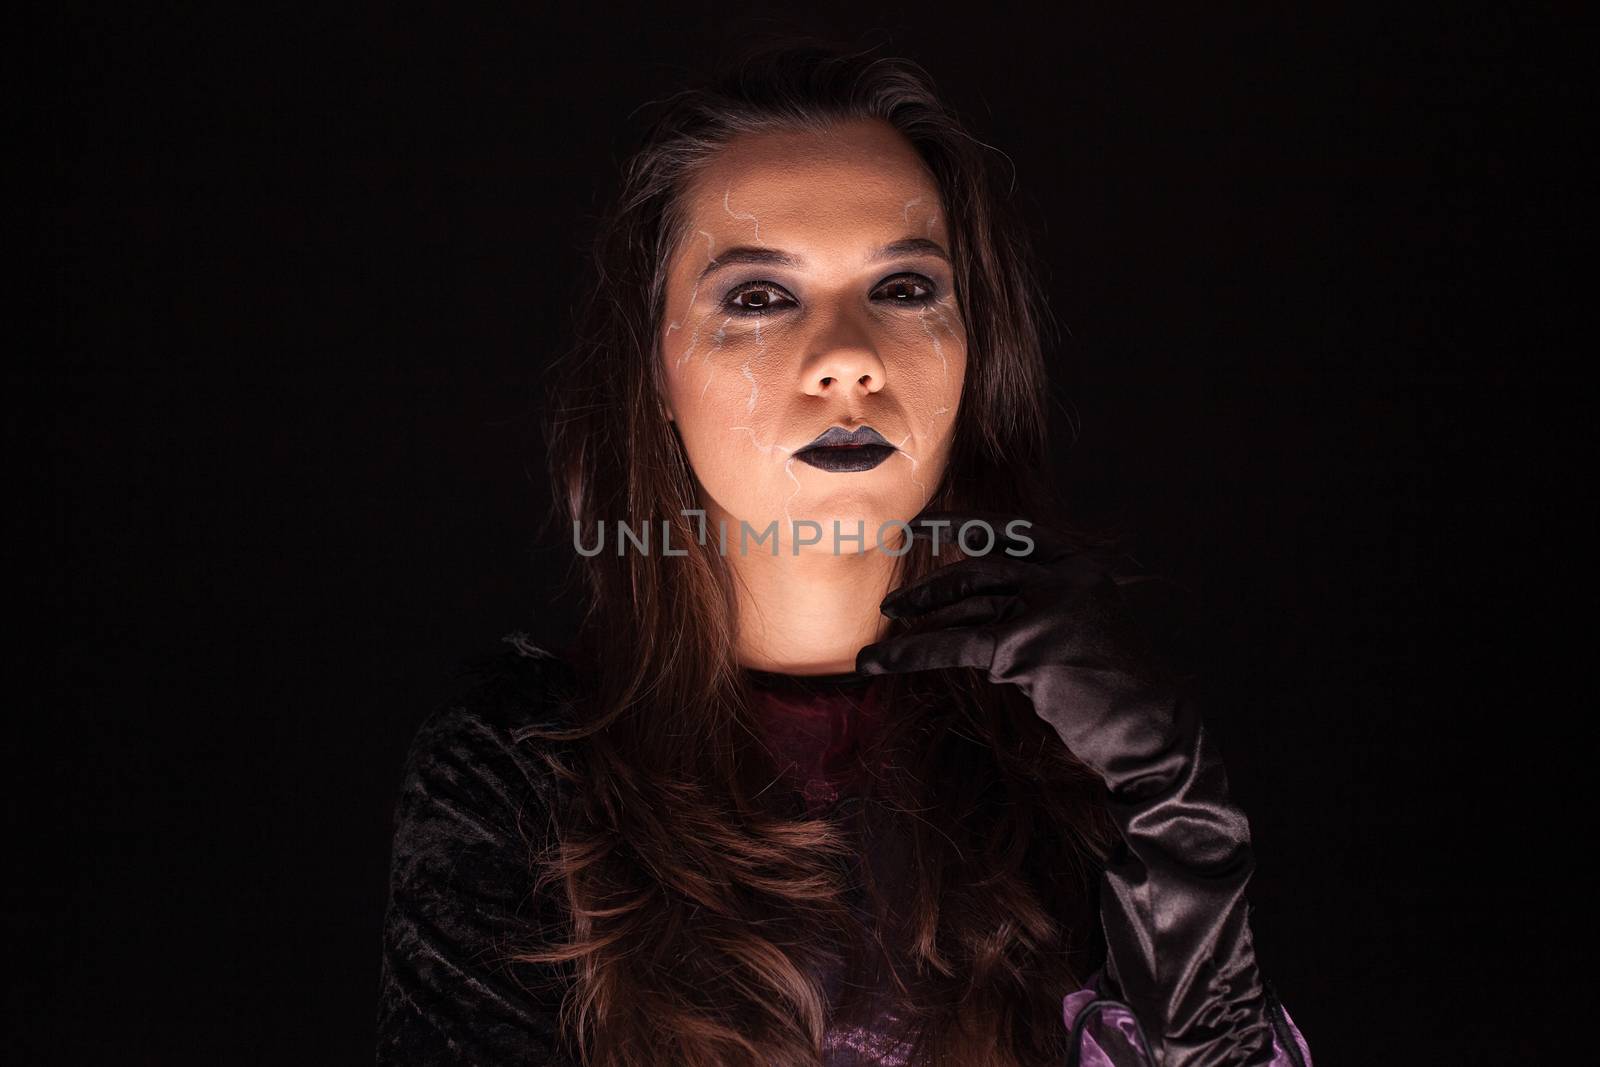 Lady wearing a witch costume over black background. Scary girl. Halloween outfit.